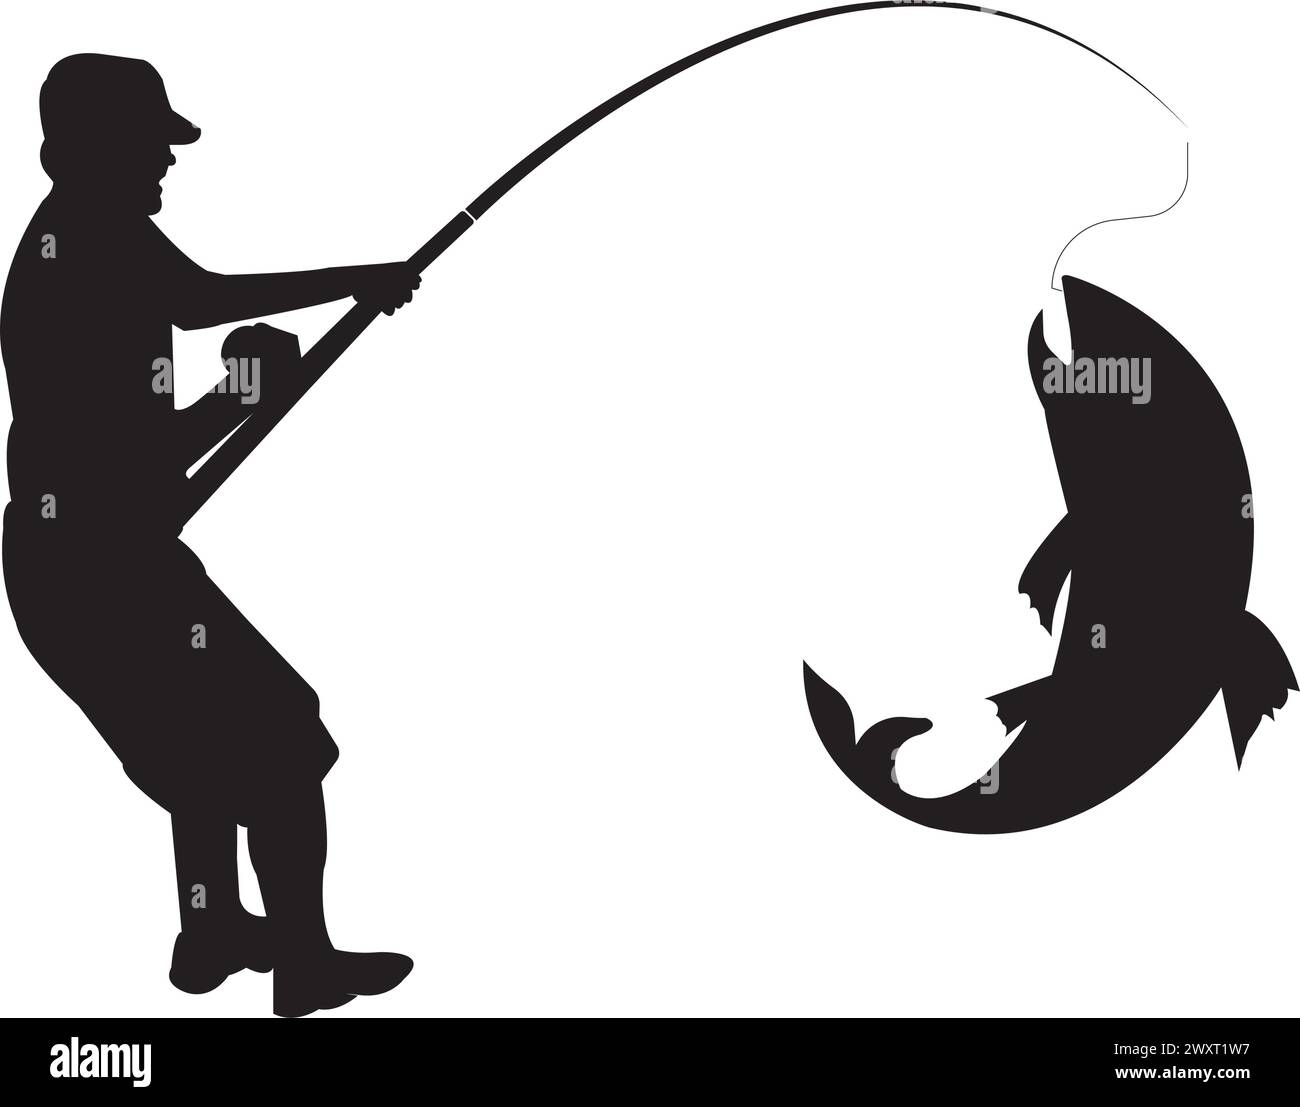 Fishing silhouette man Cut Out Stock Images & Pictures - Page 3 - Alamy